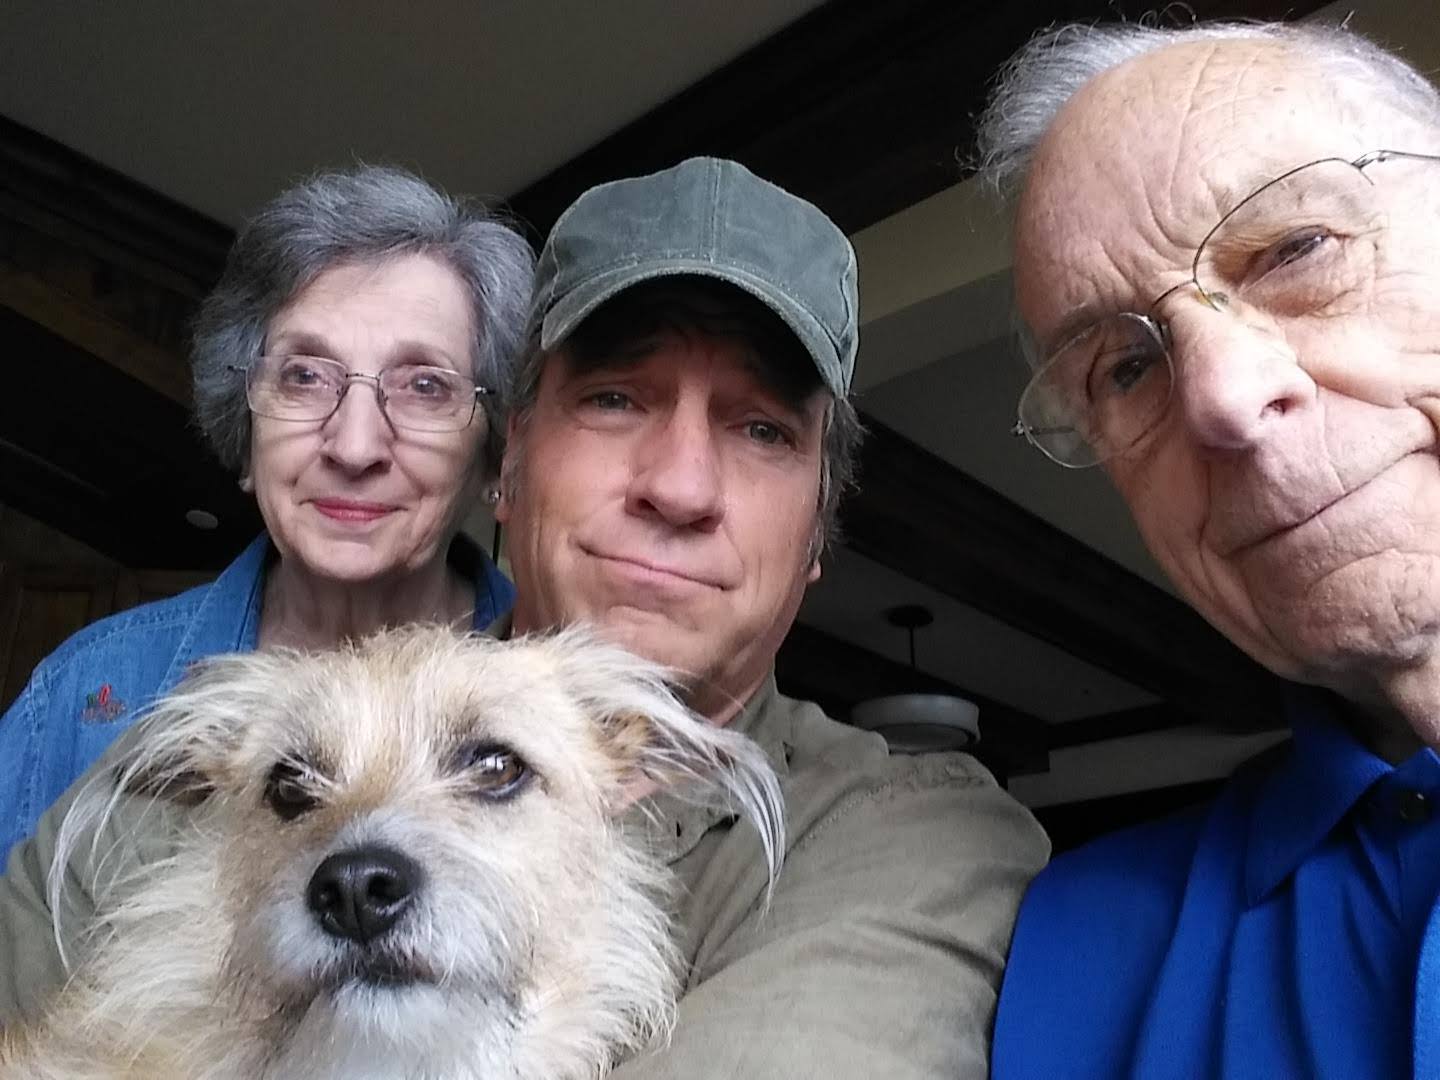 "Dirty Jobs" star Mike Rowe with his mom, Peggy Rowe (left), and his dad, John Rowe (right). (Mike Rowe/Facebook)